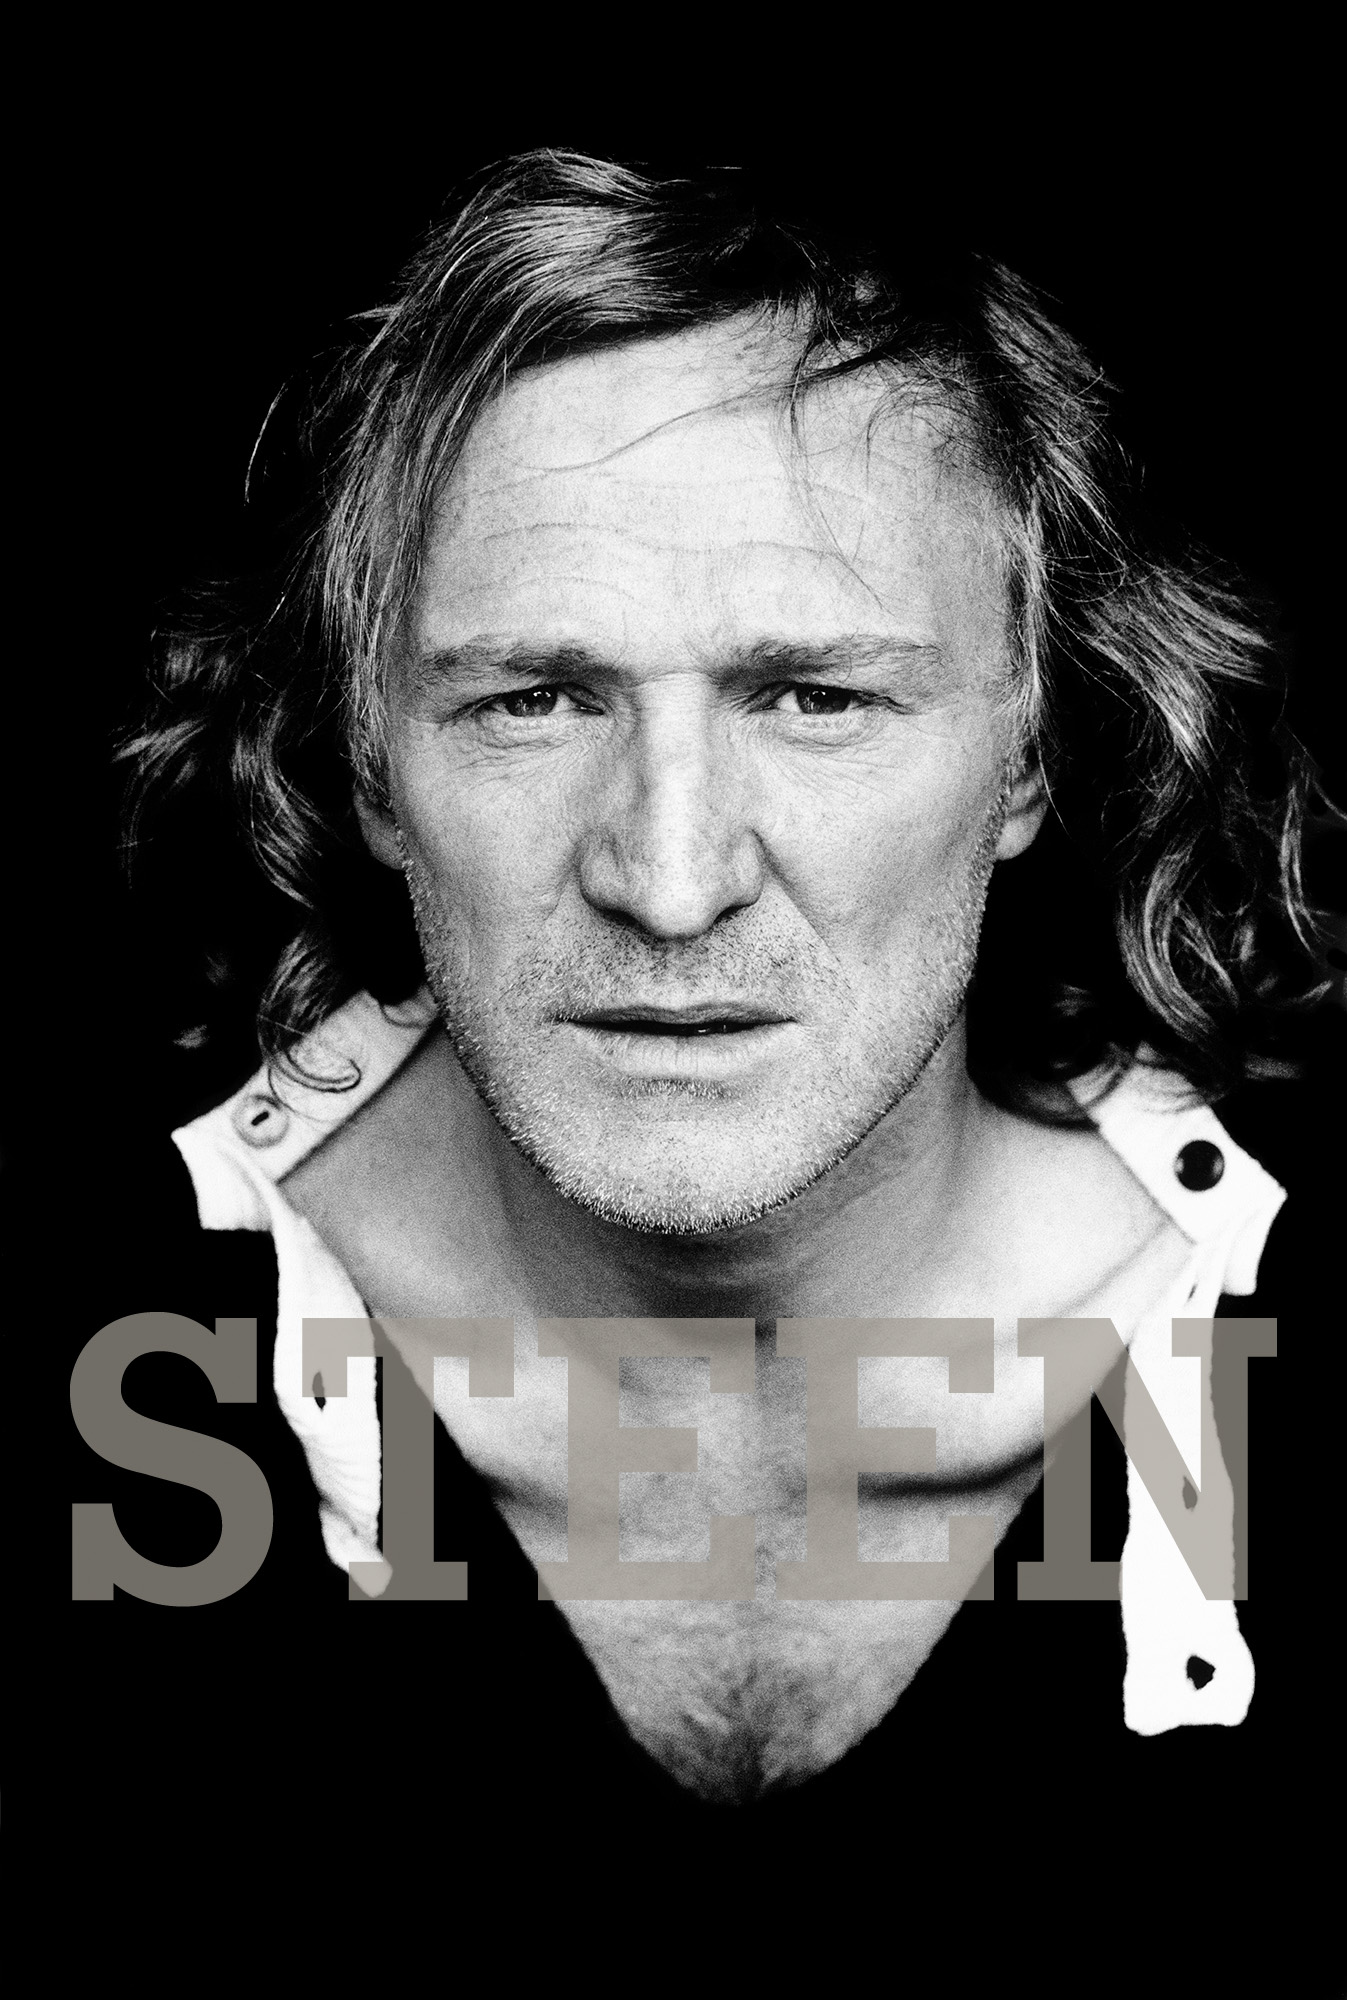 an exclusive limited edition photograph of the irish actor richard harris by david steen